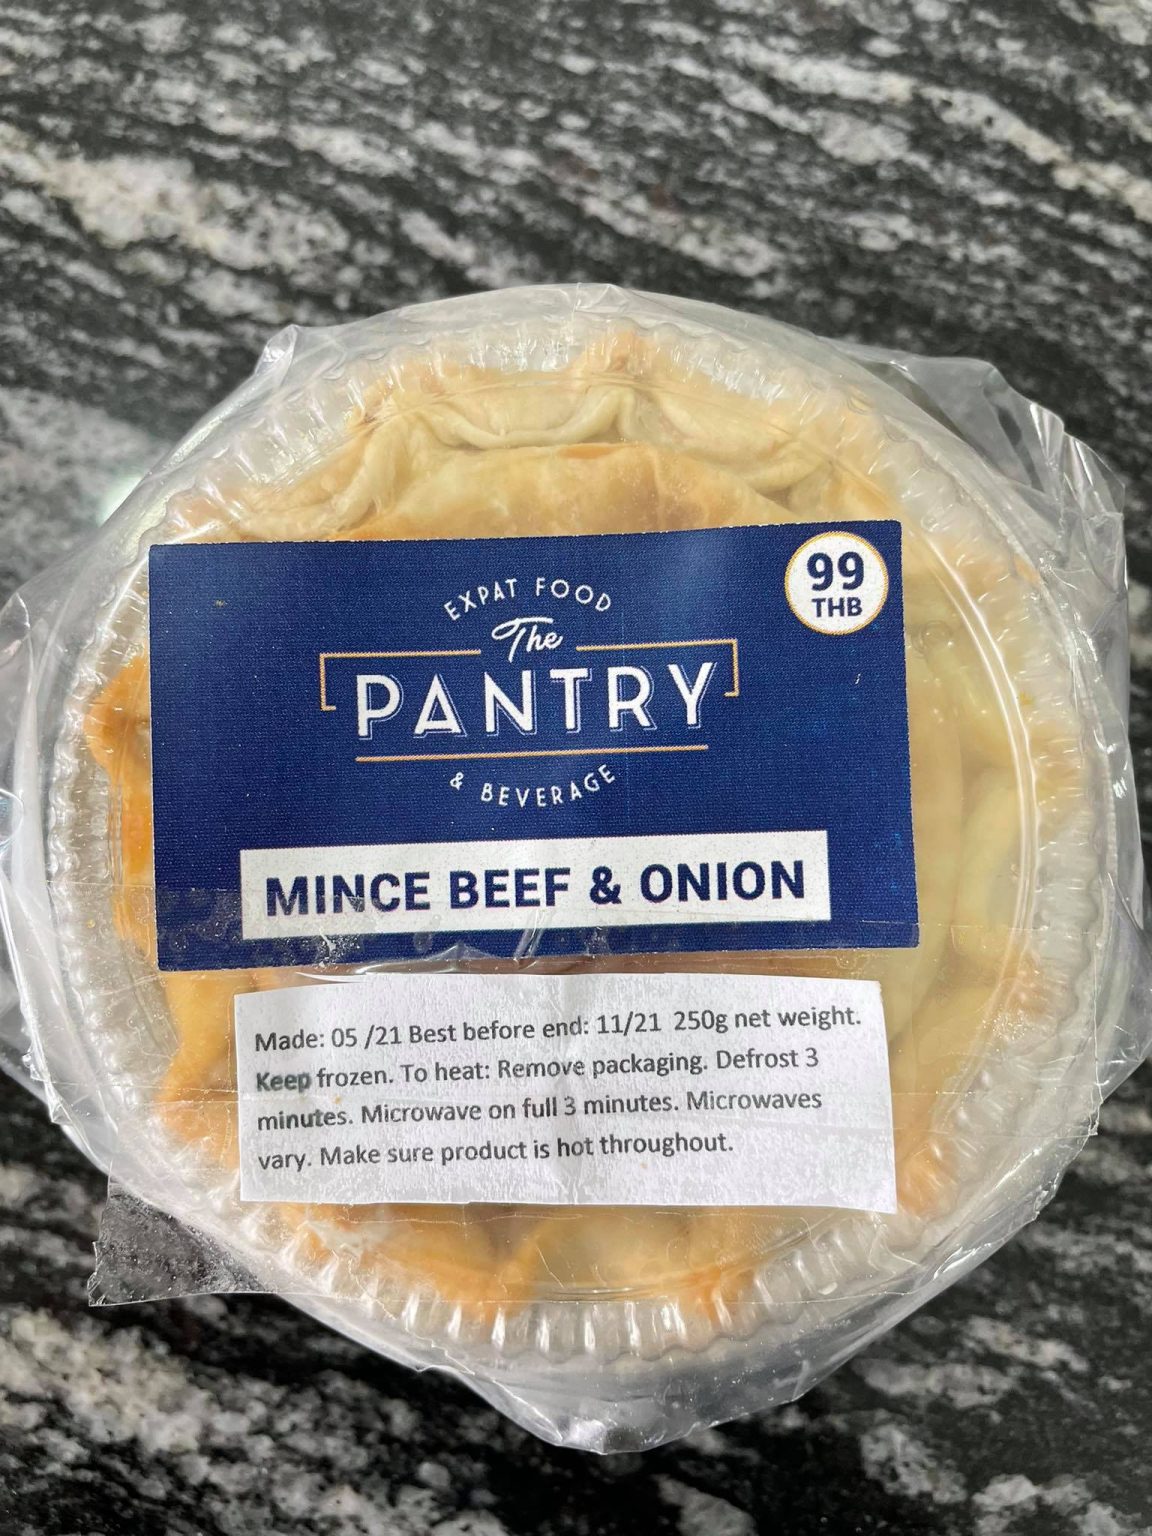 Minced Beef & Onion Pie - The Pantry Expat Food & Beverage